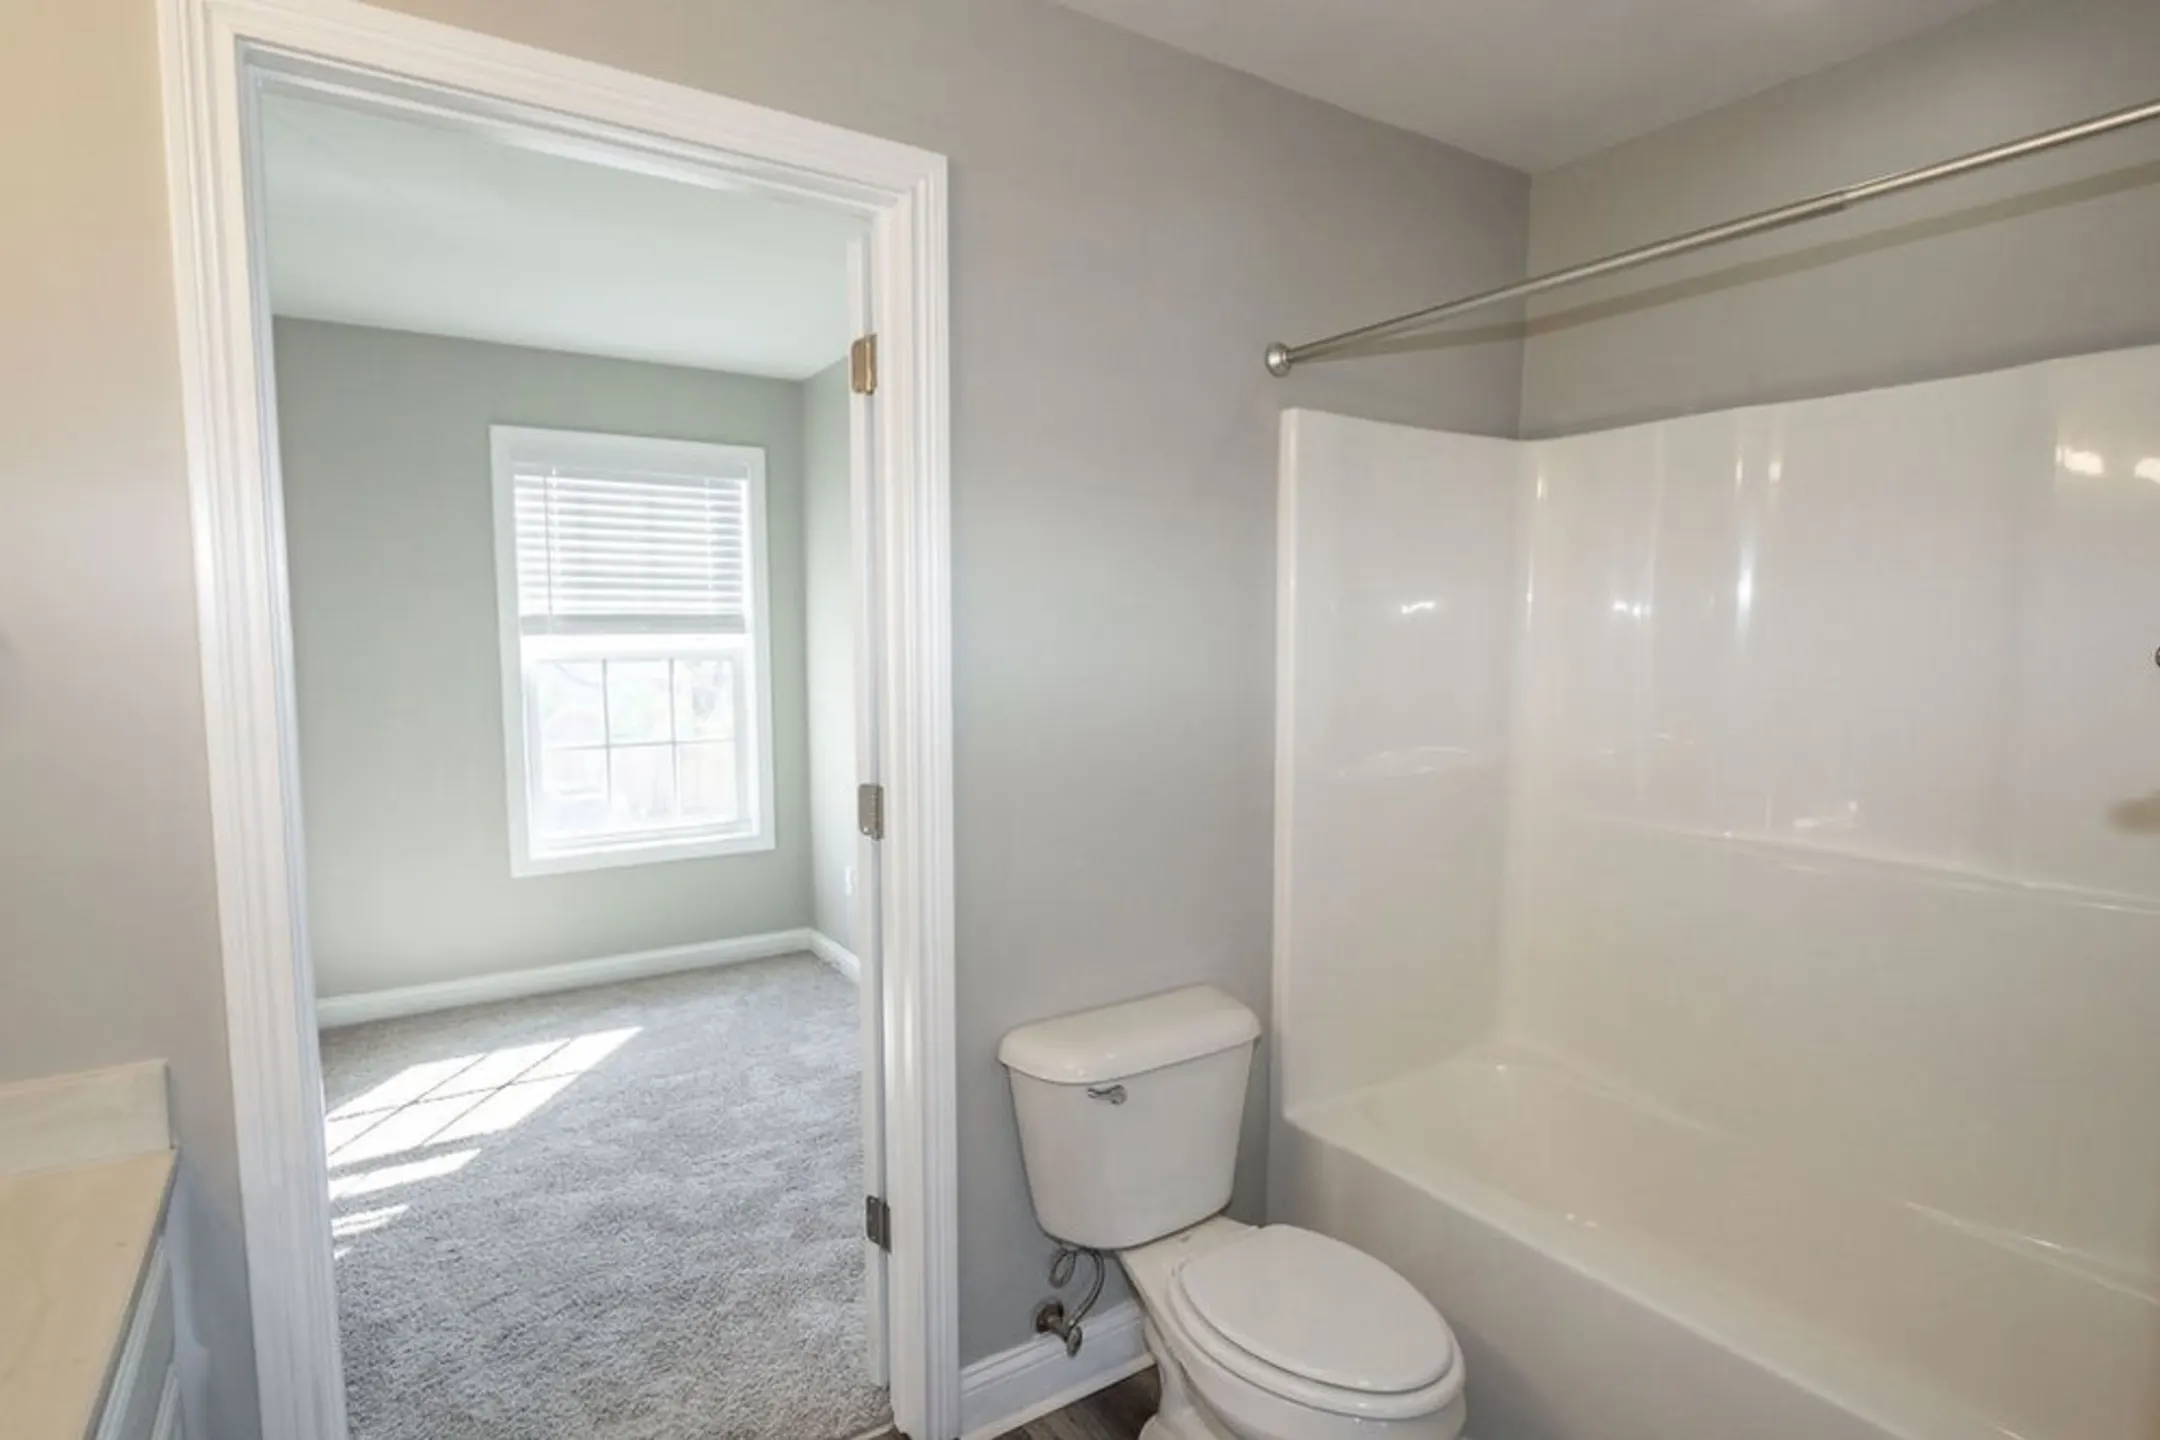 Bathroom - Old Todds Townhomes - Lexington, KY